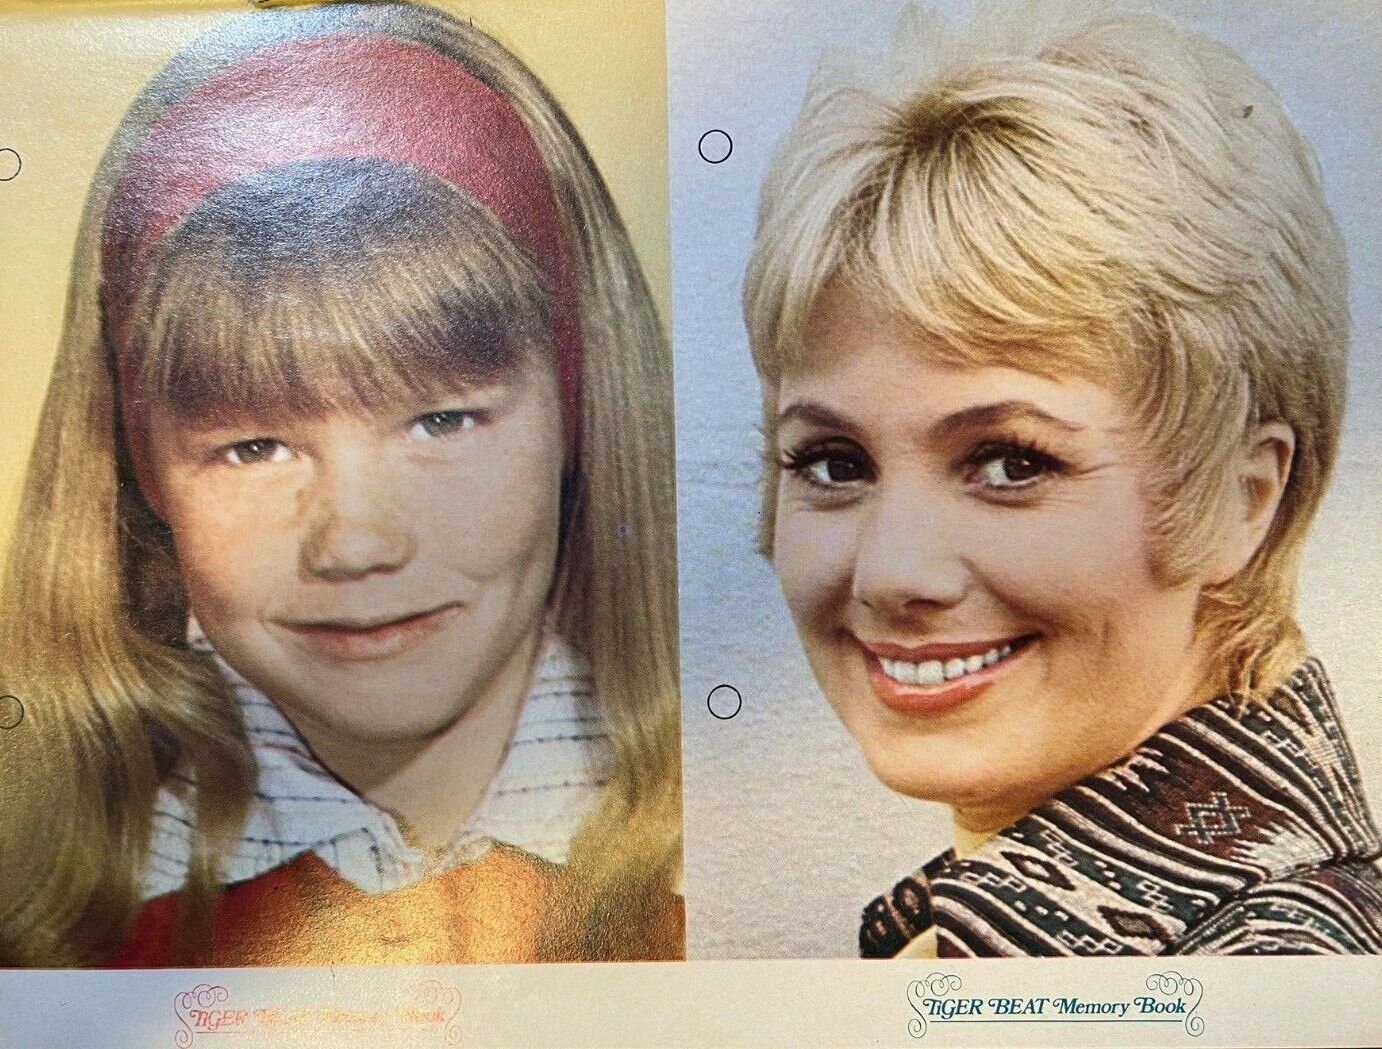 1972 Shirley Jones & Suzanne Crouch The Partridge Family